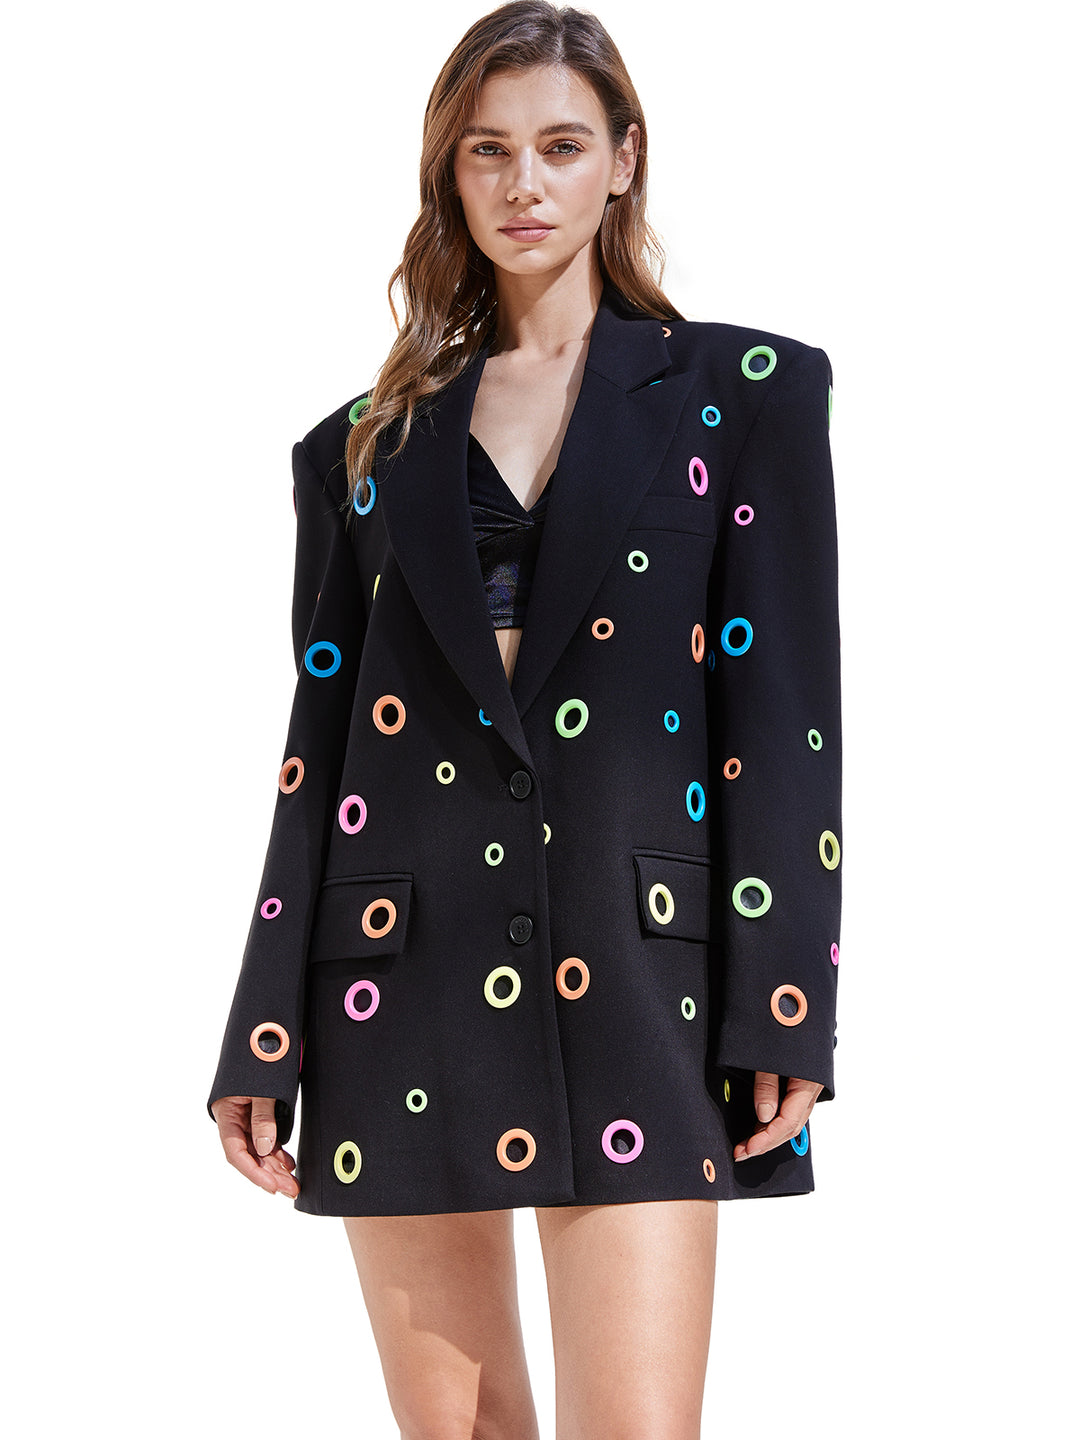 Colored Eyelet Tailored Blazer